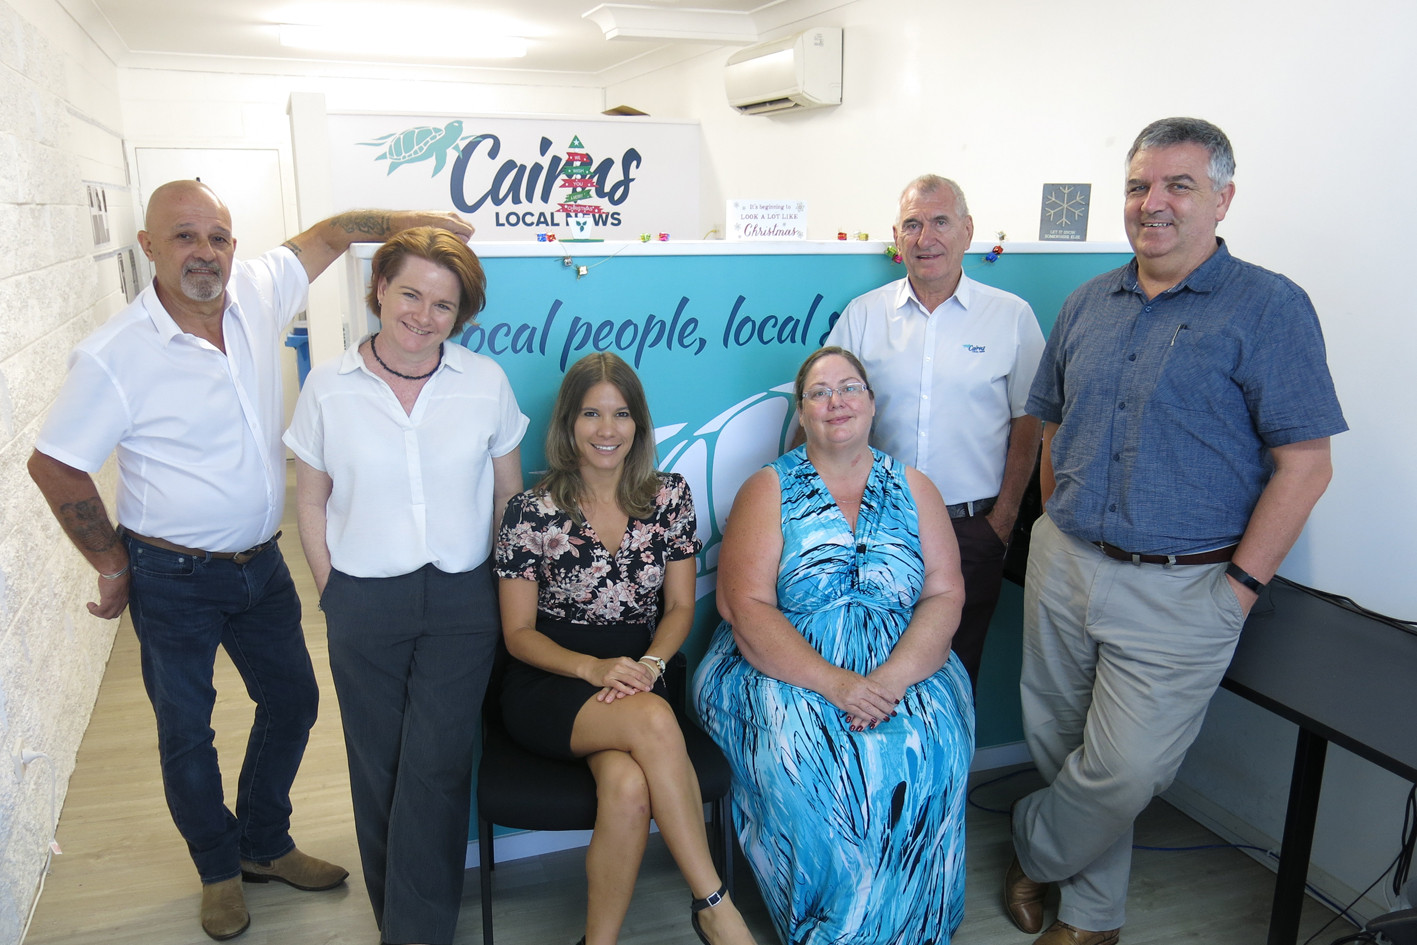 CAIRNS LOCAL NEWS TEAM: Business marketing manager Steve Andrews, administration officer Lisa Harris, journalist Tanya Murphy, business marketing manager Kath MacLean, business marketing manager Denis Olsson, and editor Peter McCullagh at the Cairns Local News office. (Absent) freelance journalist Nicole Gibson, graphic designer Michele Jules.